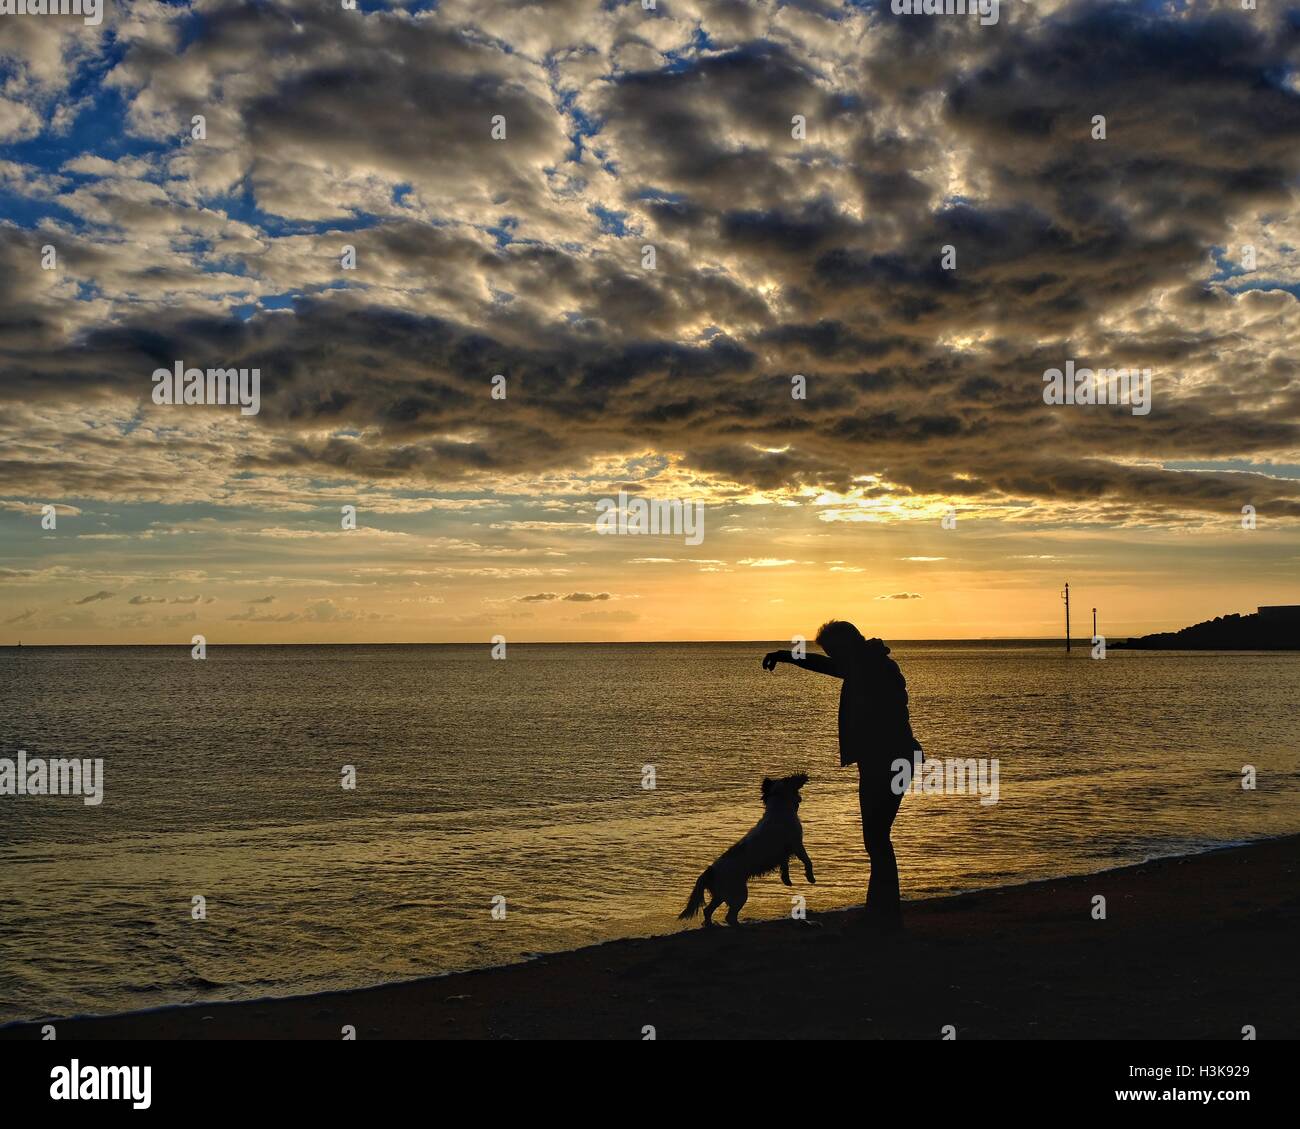 West Bay, Dorset, UK. 9 October 2016. A woman plays with her dog on West Bay Beach as the day ends with a Beautiful Autumn sunset. Stock Photo